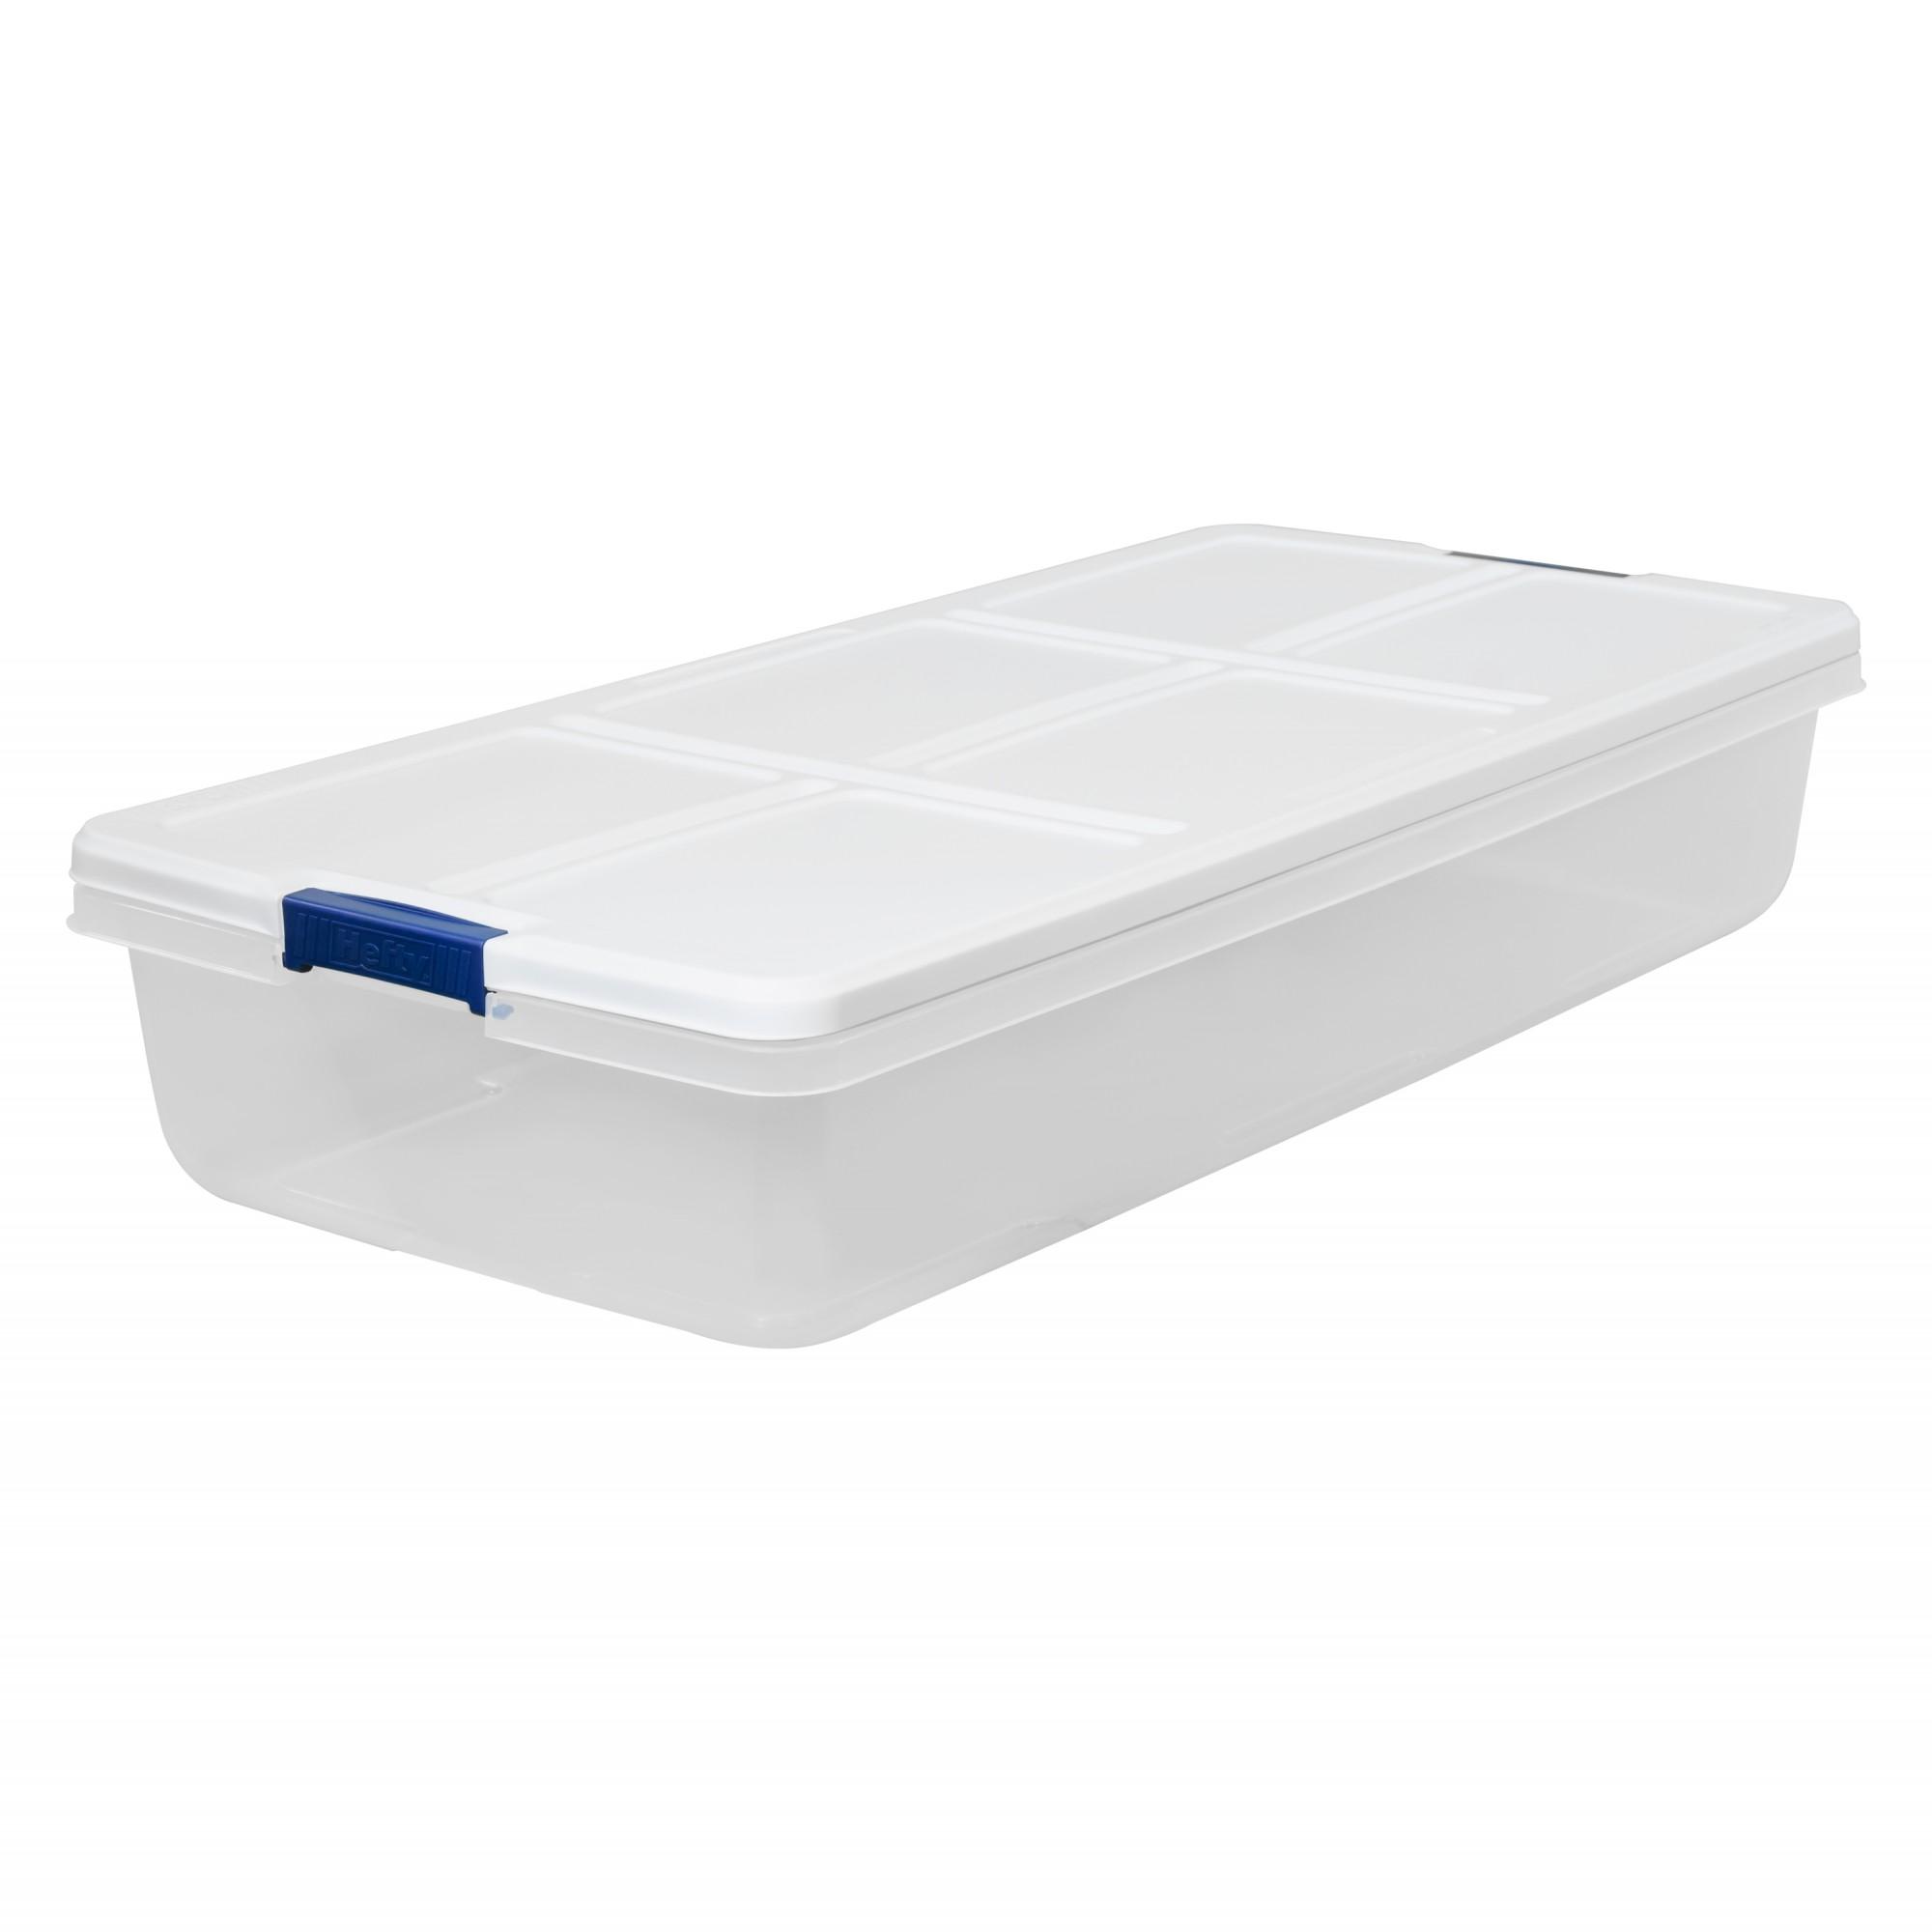 52-qt Hefty Latched Storage Bin, White Lid with Blue Handles - image 1 of 5